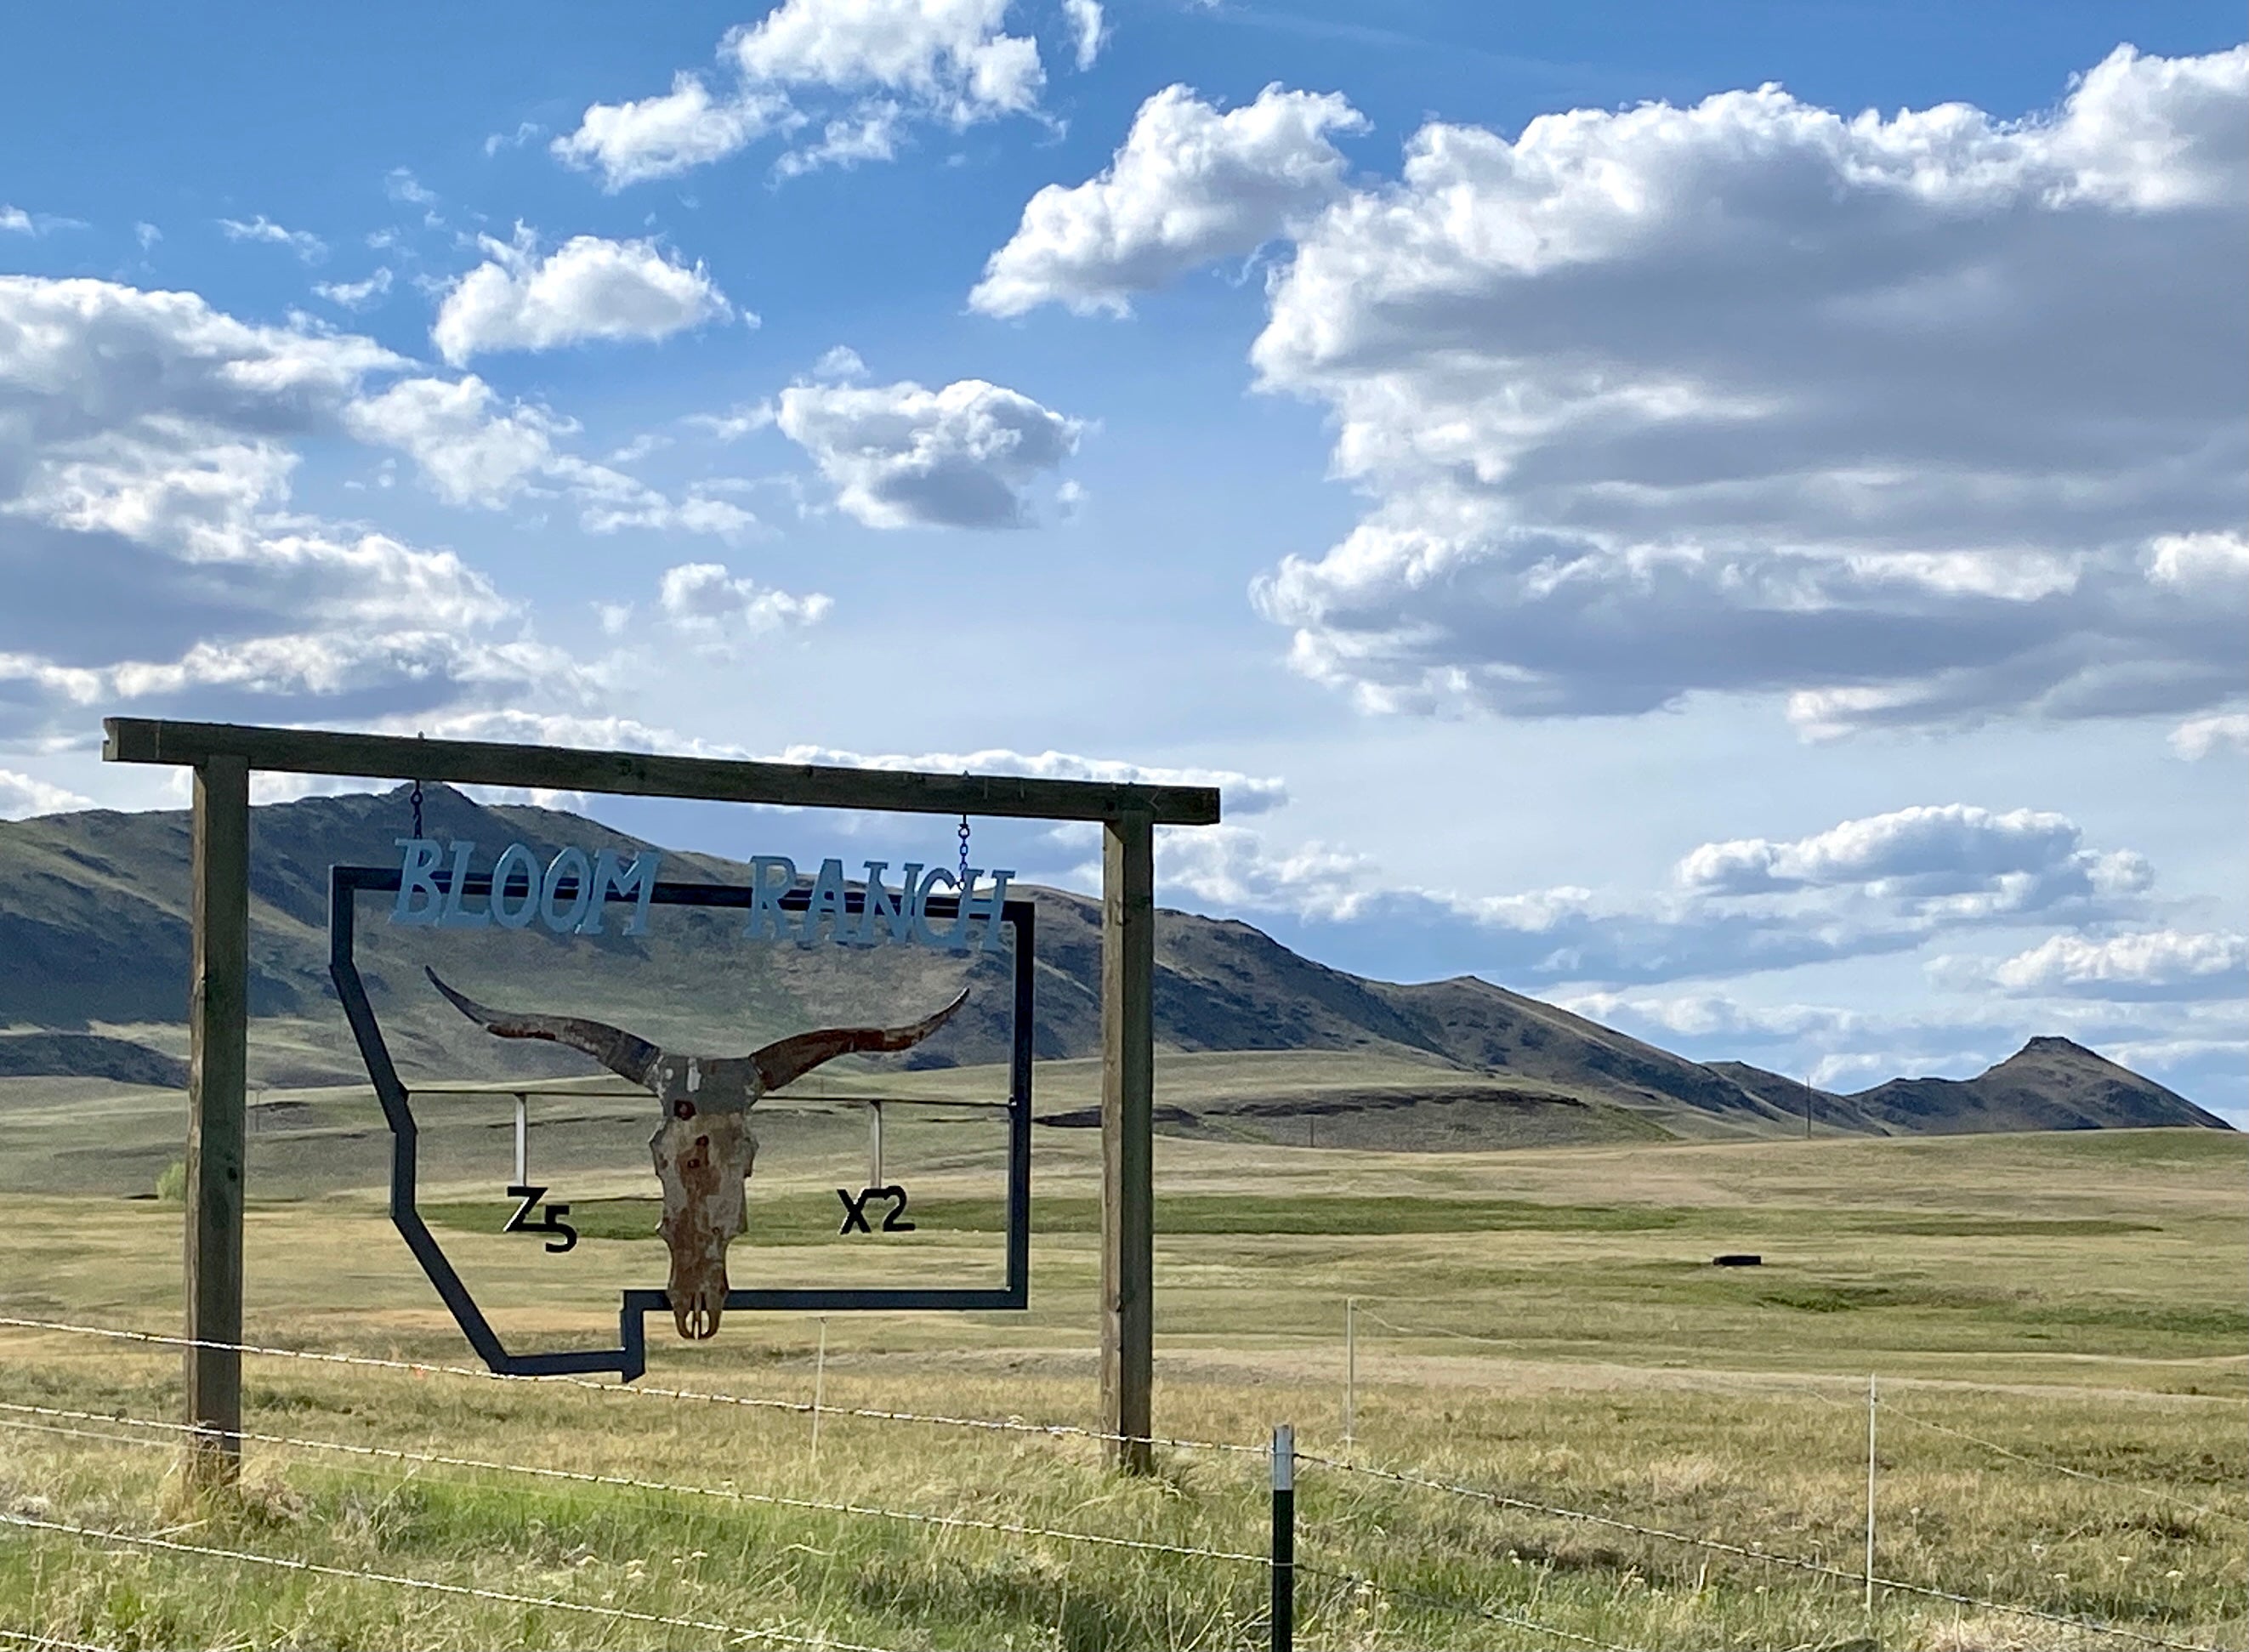 image shows a landscape view with expansive blue sky, rugged hills and grassland. In the foreground is a large metal sign shaped like a longhorn cattle skull and the outline of Montana. The sign says "Bloom Ranch"